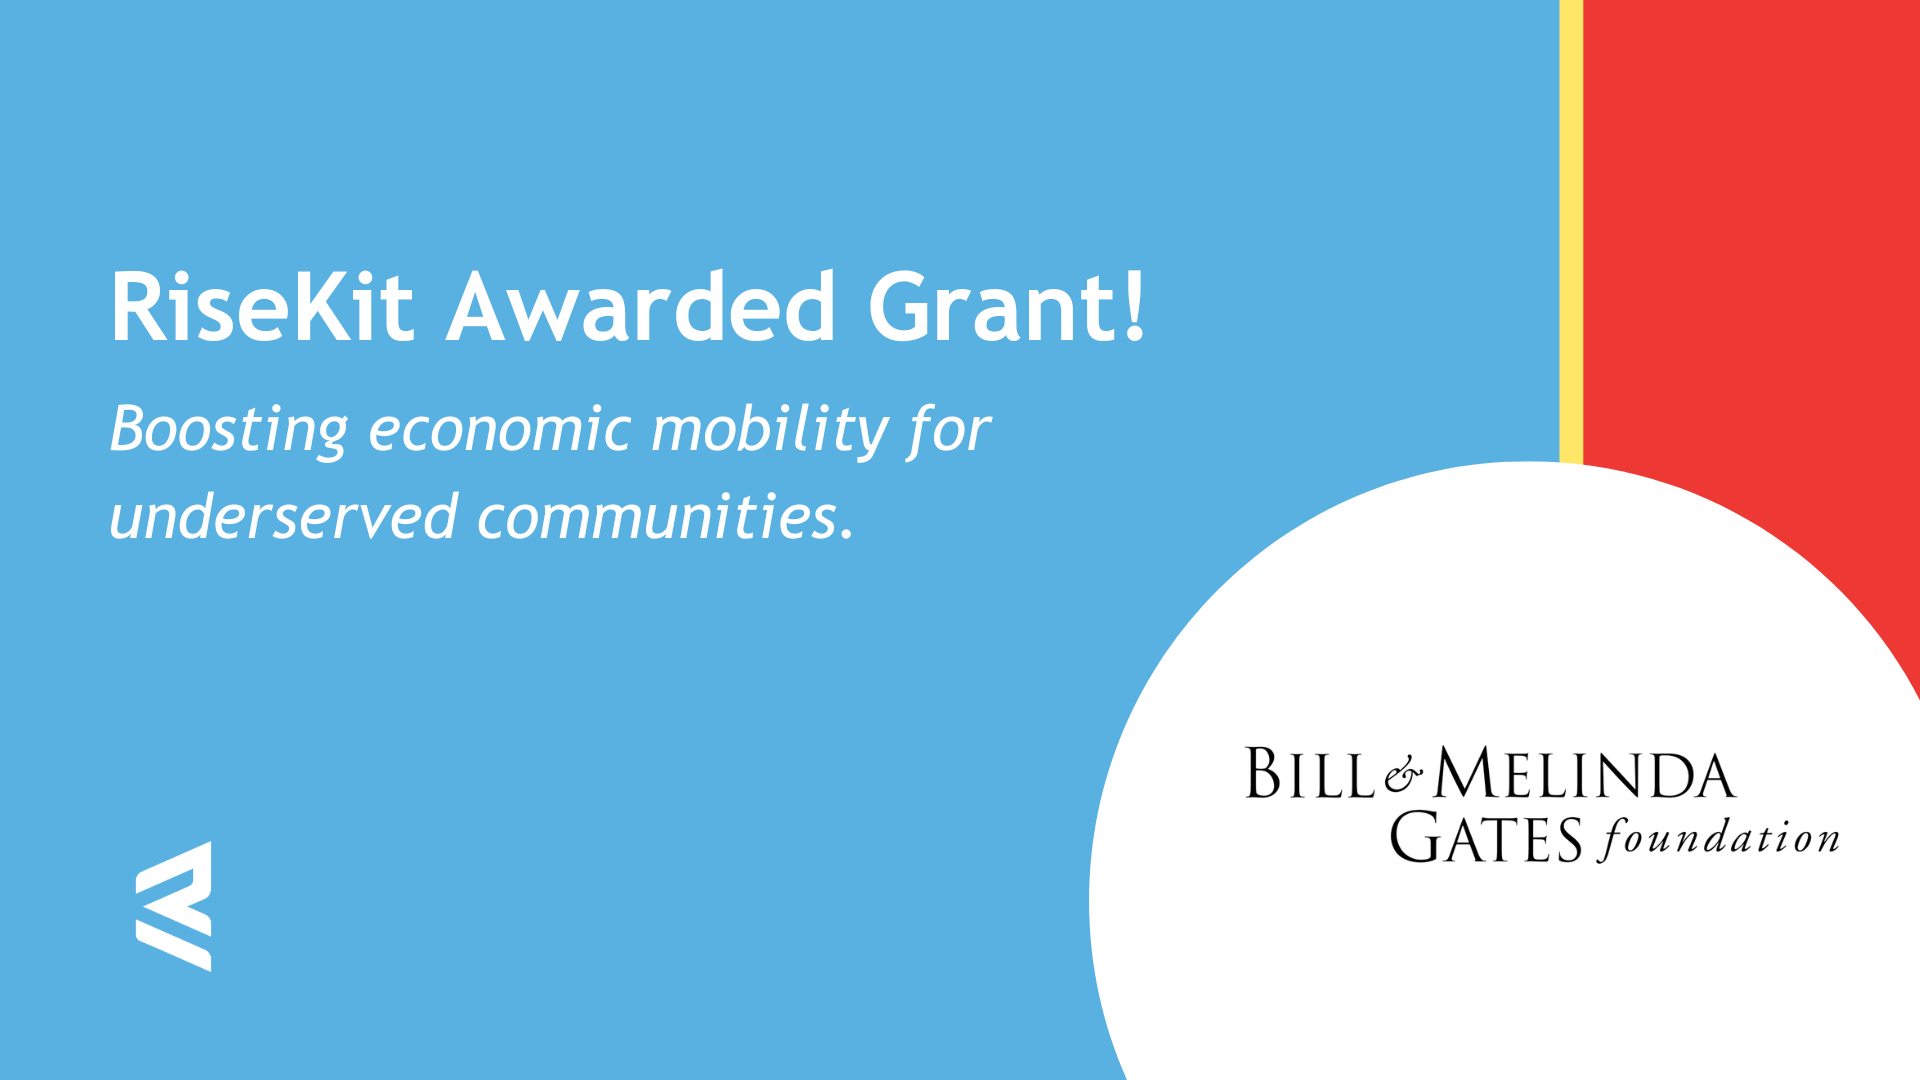 RiseKit Awarded Grant to Boost Economic Mobility for Underserved Communities from Bill & Melinda Gates Foundation on a blue background